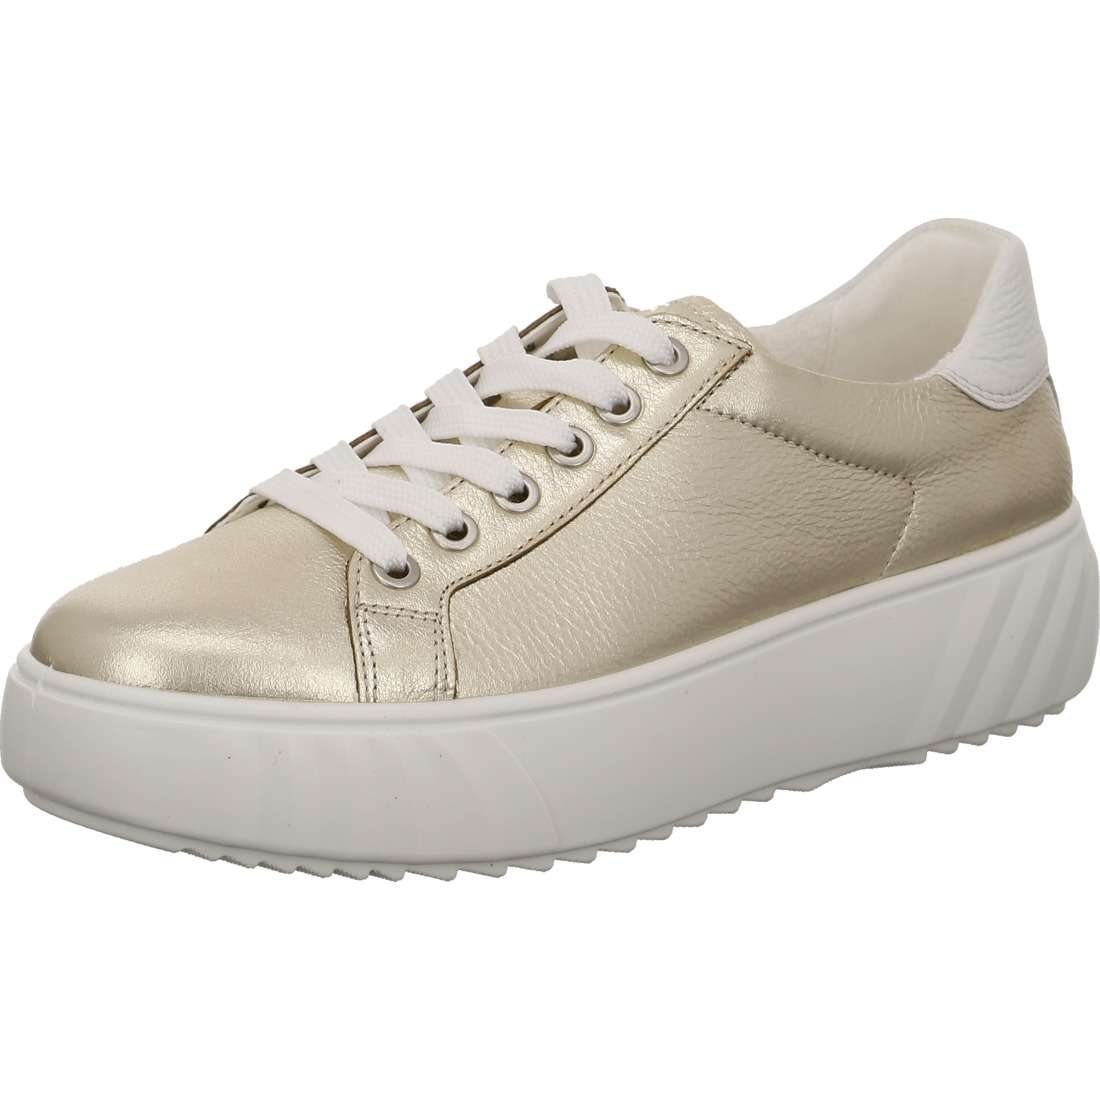 Side angle view showing the off-white sole and gold-coloured upper of the Ara sneaker.